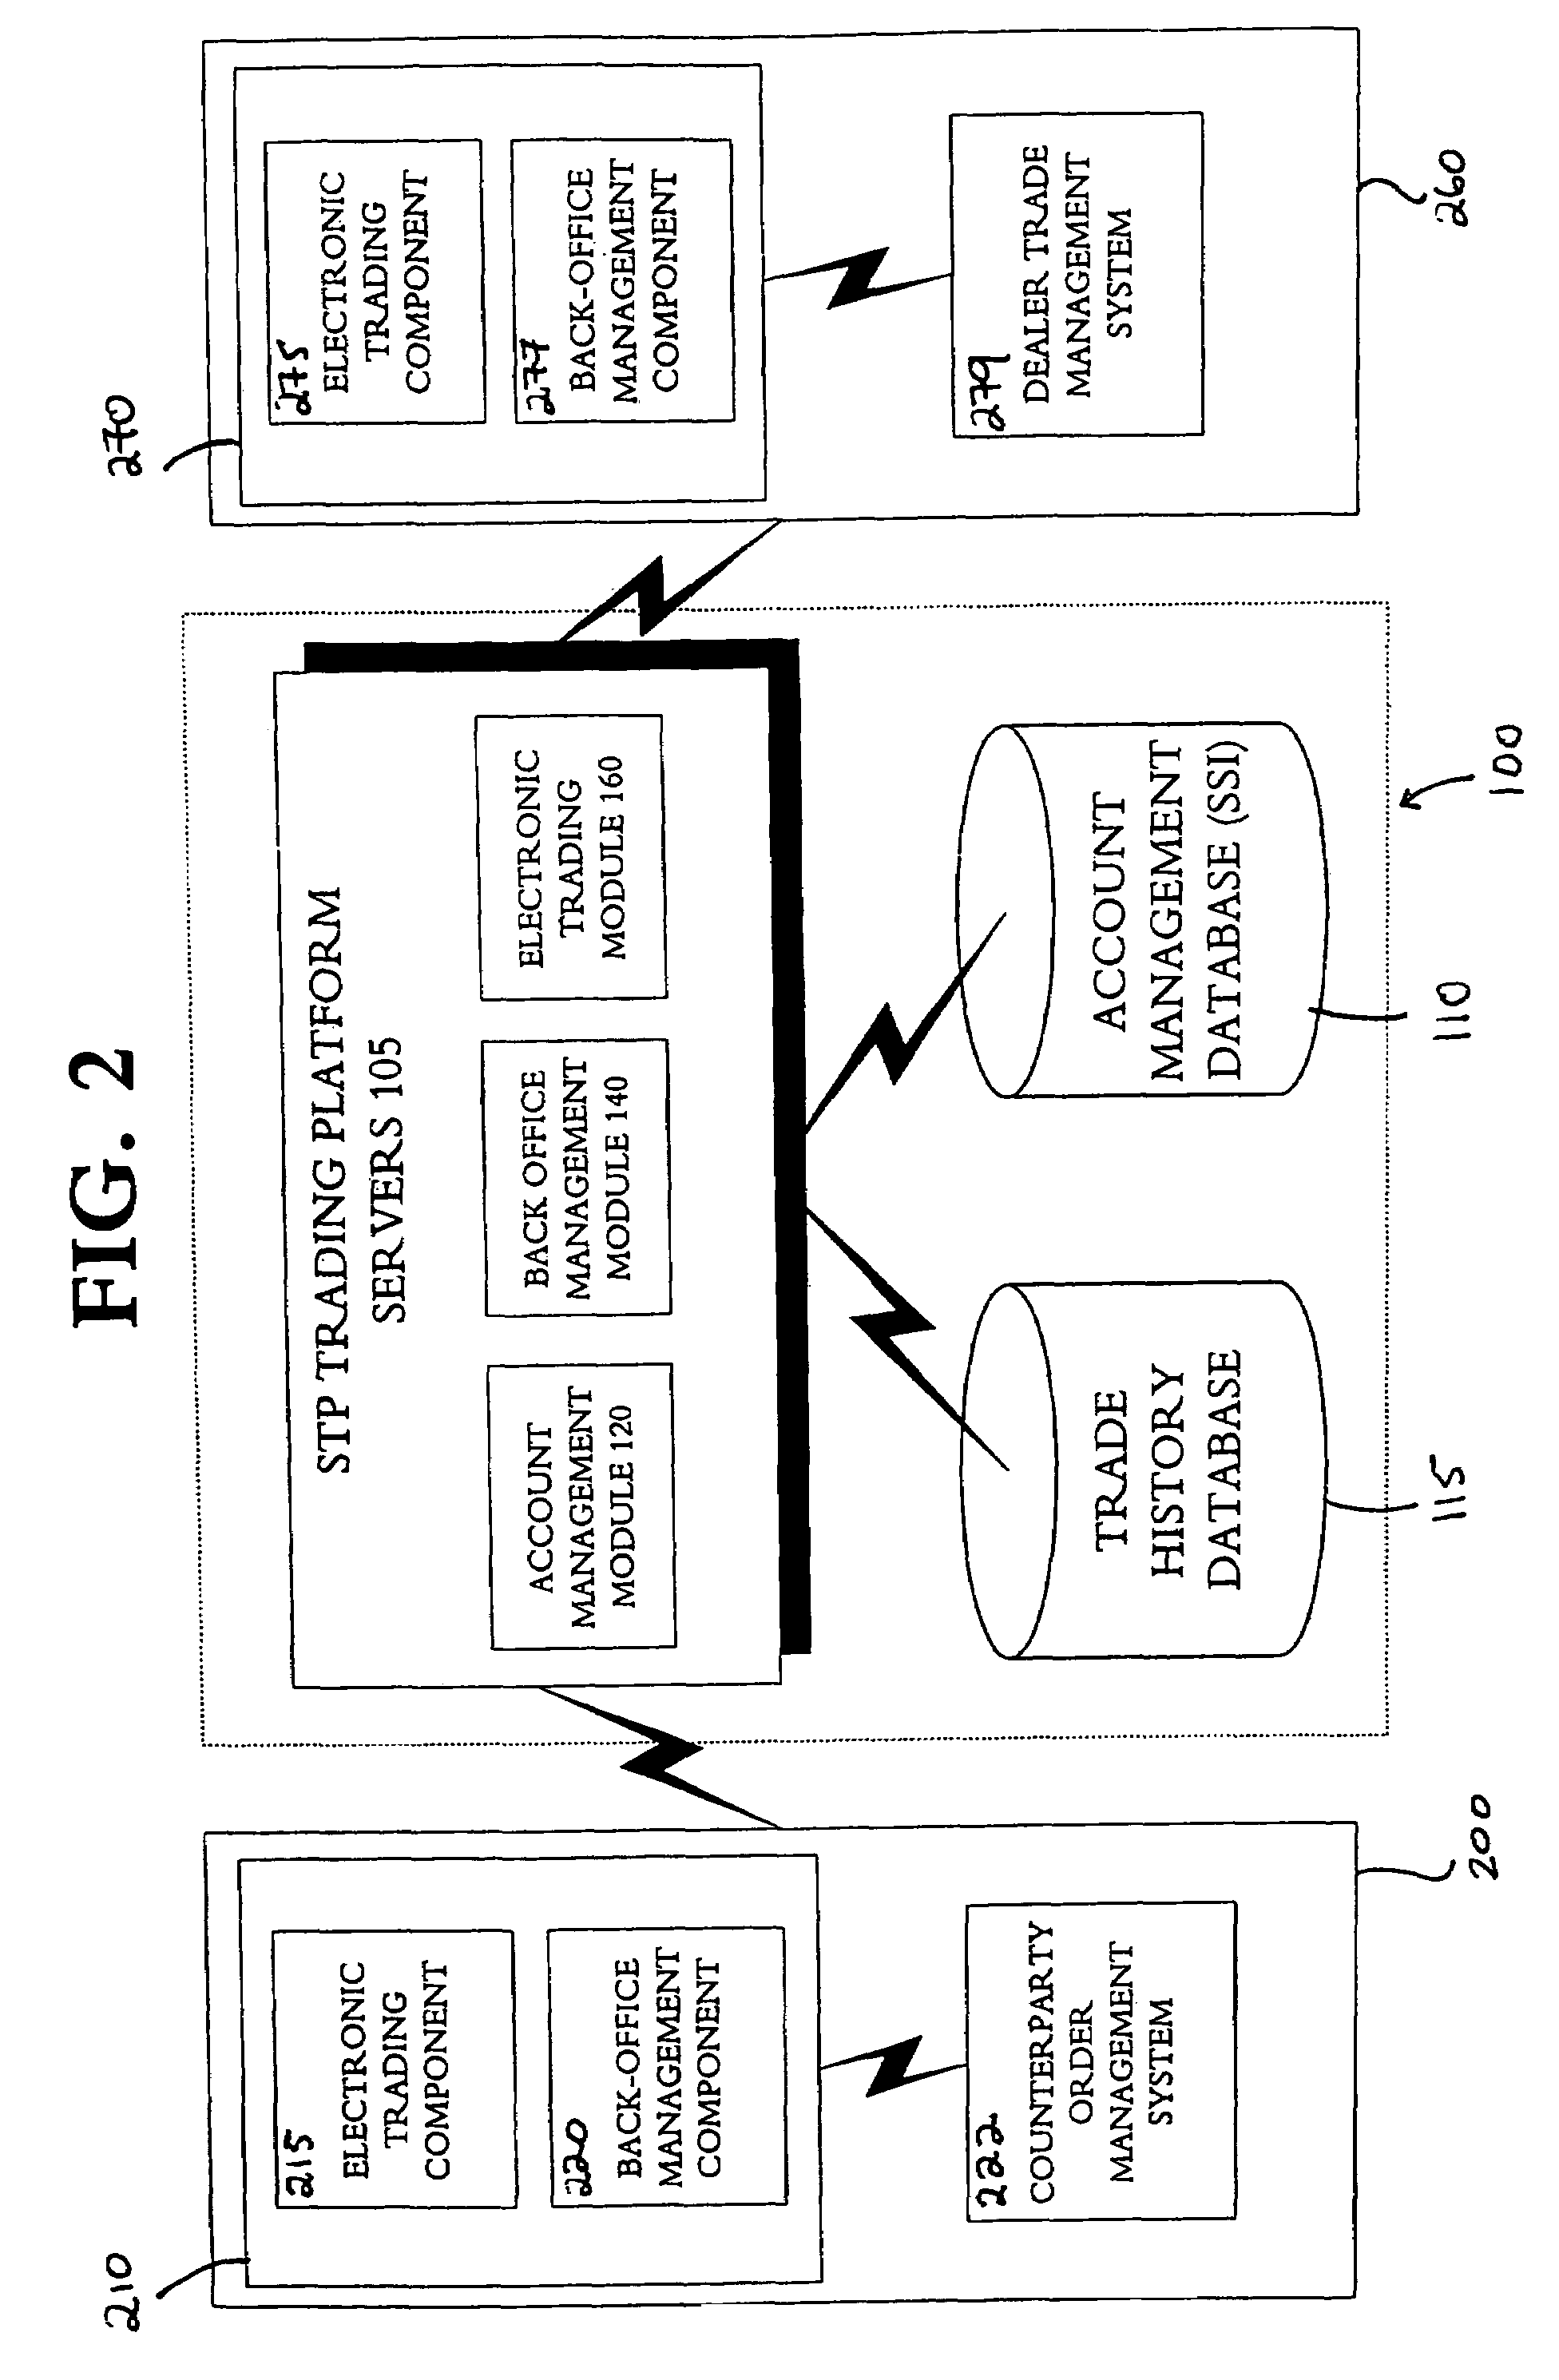 Method and system for effecting straight-through-processing of trades of various financial instruments